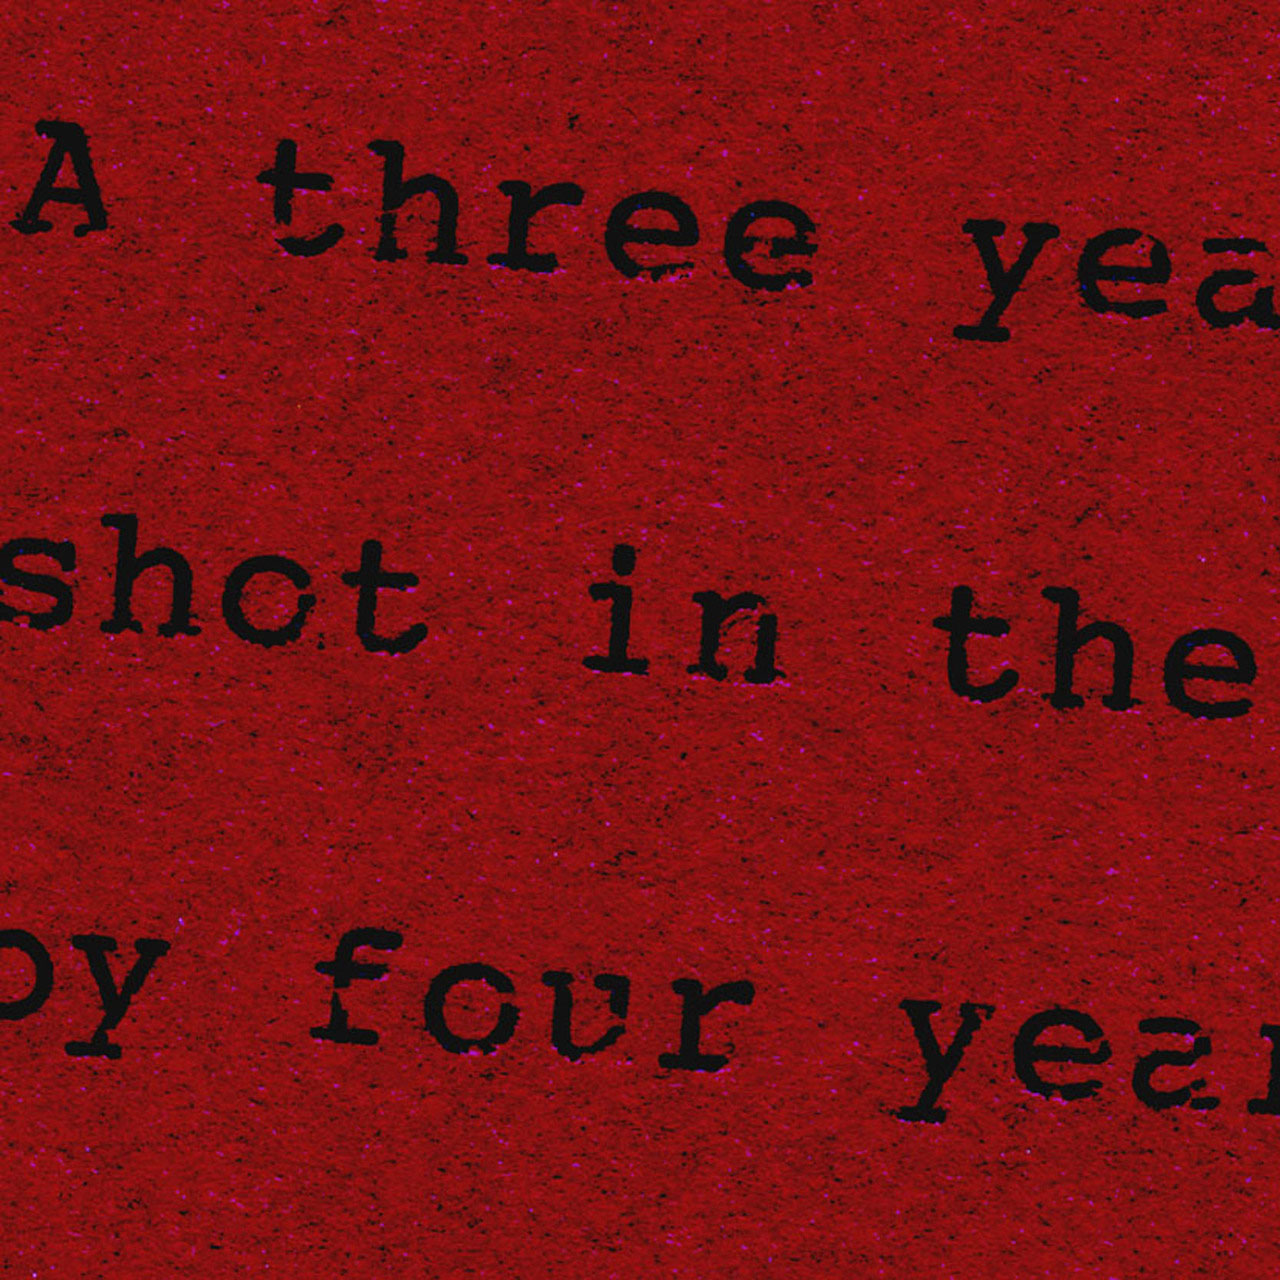 a red background with black printed words that say, "A three year old shot in the mouth by four year old" across the print.